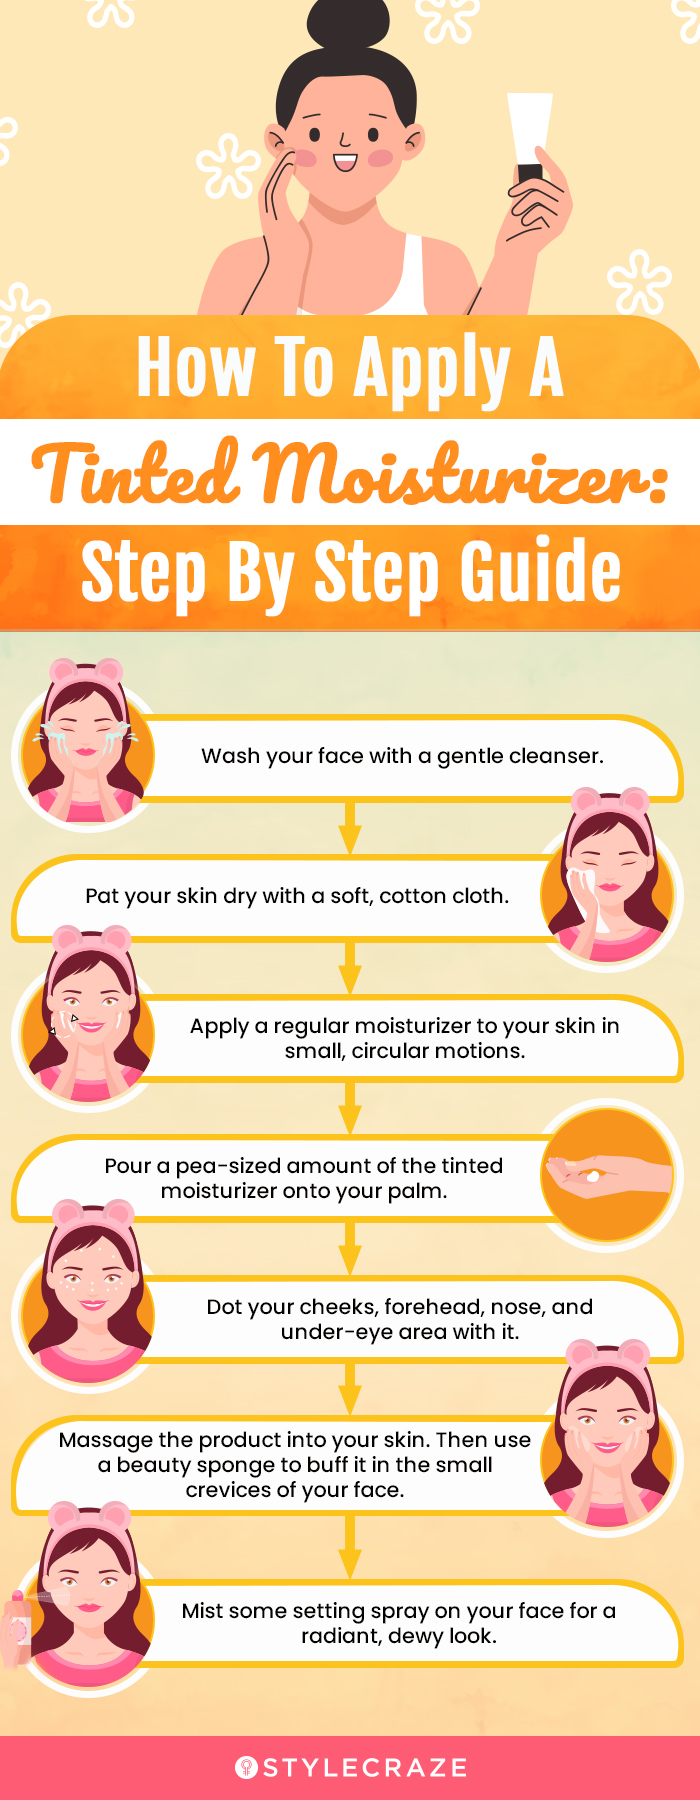 How To Apply A Tinted Moisturizer: Step By Step Guide (infographic)